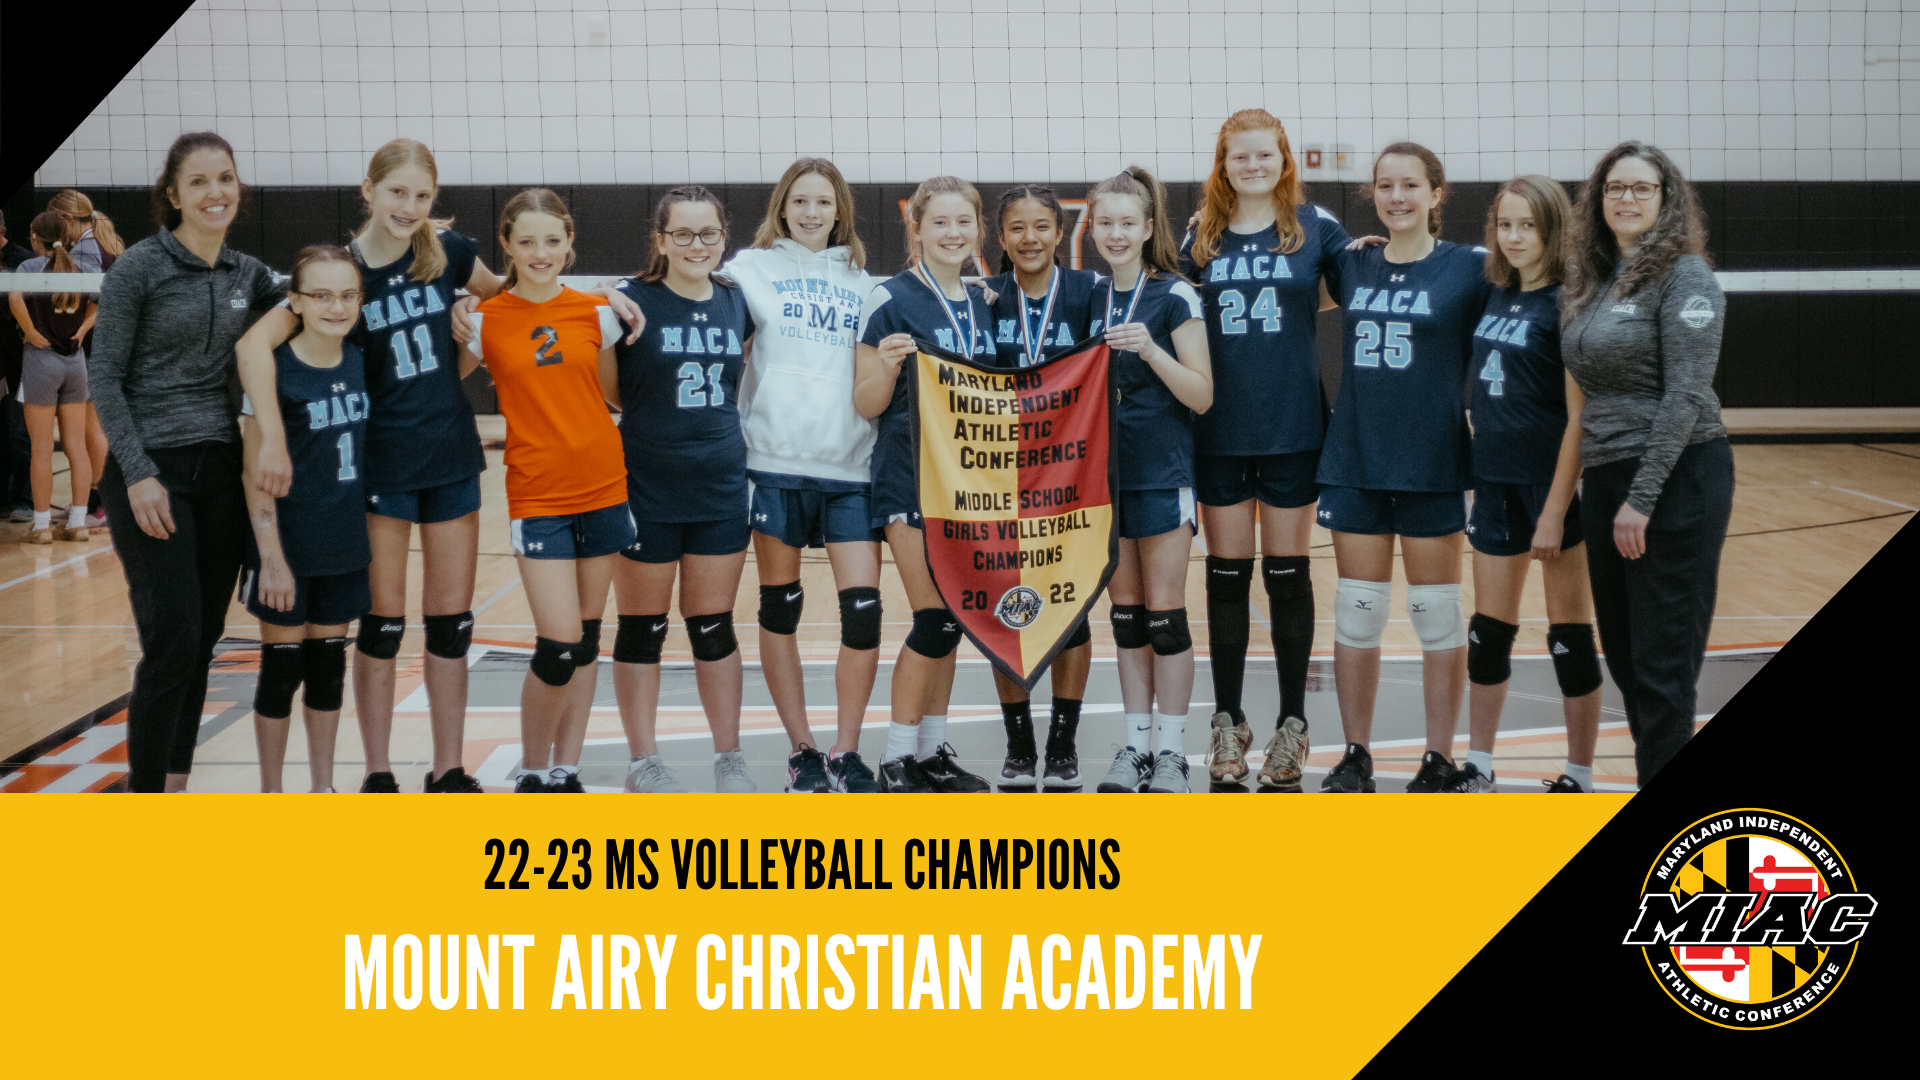 2022 MS Volleyball Champions – Mount Airy Christian Academy